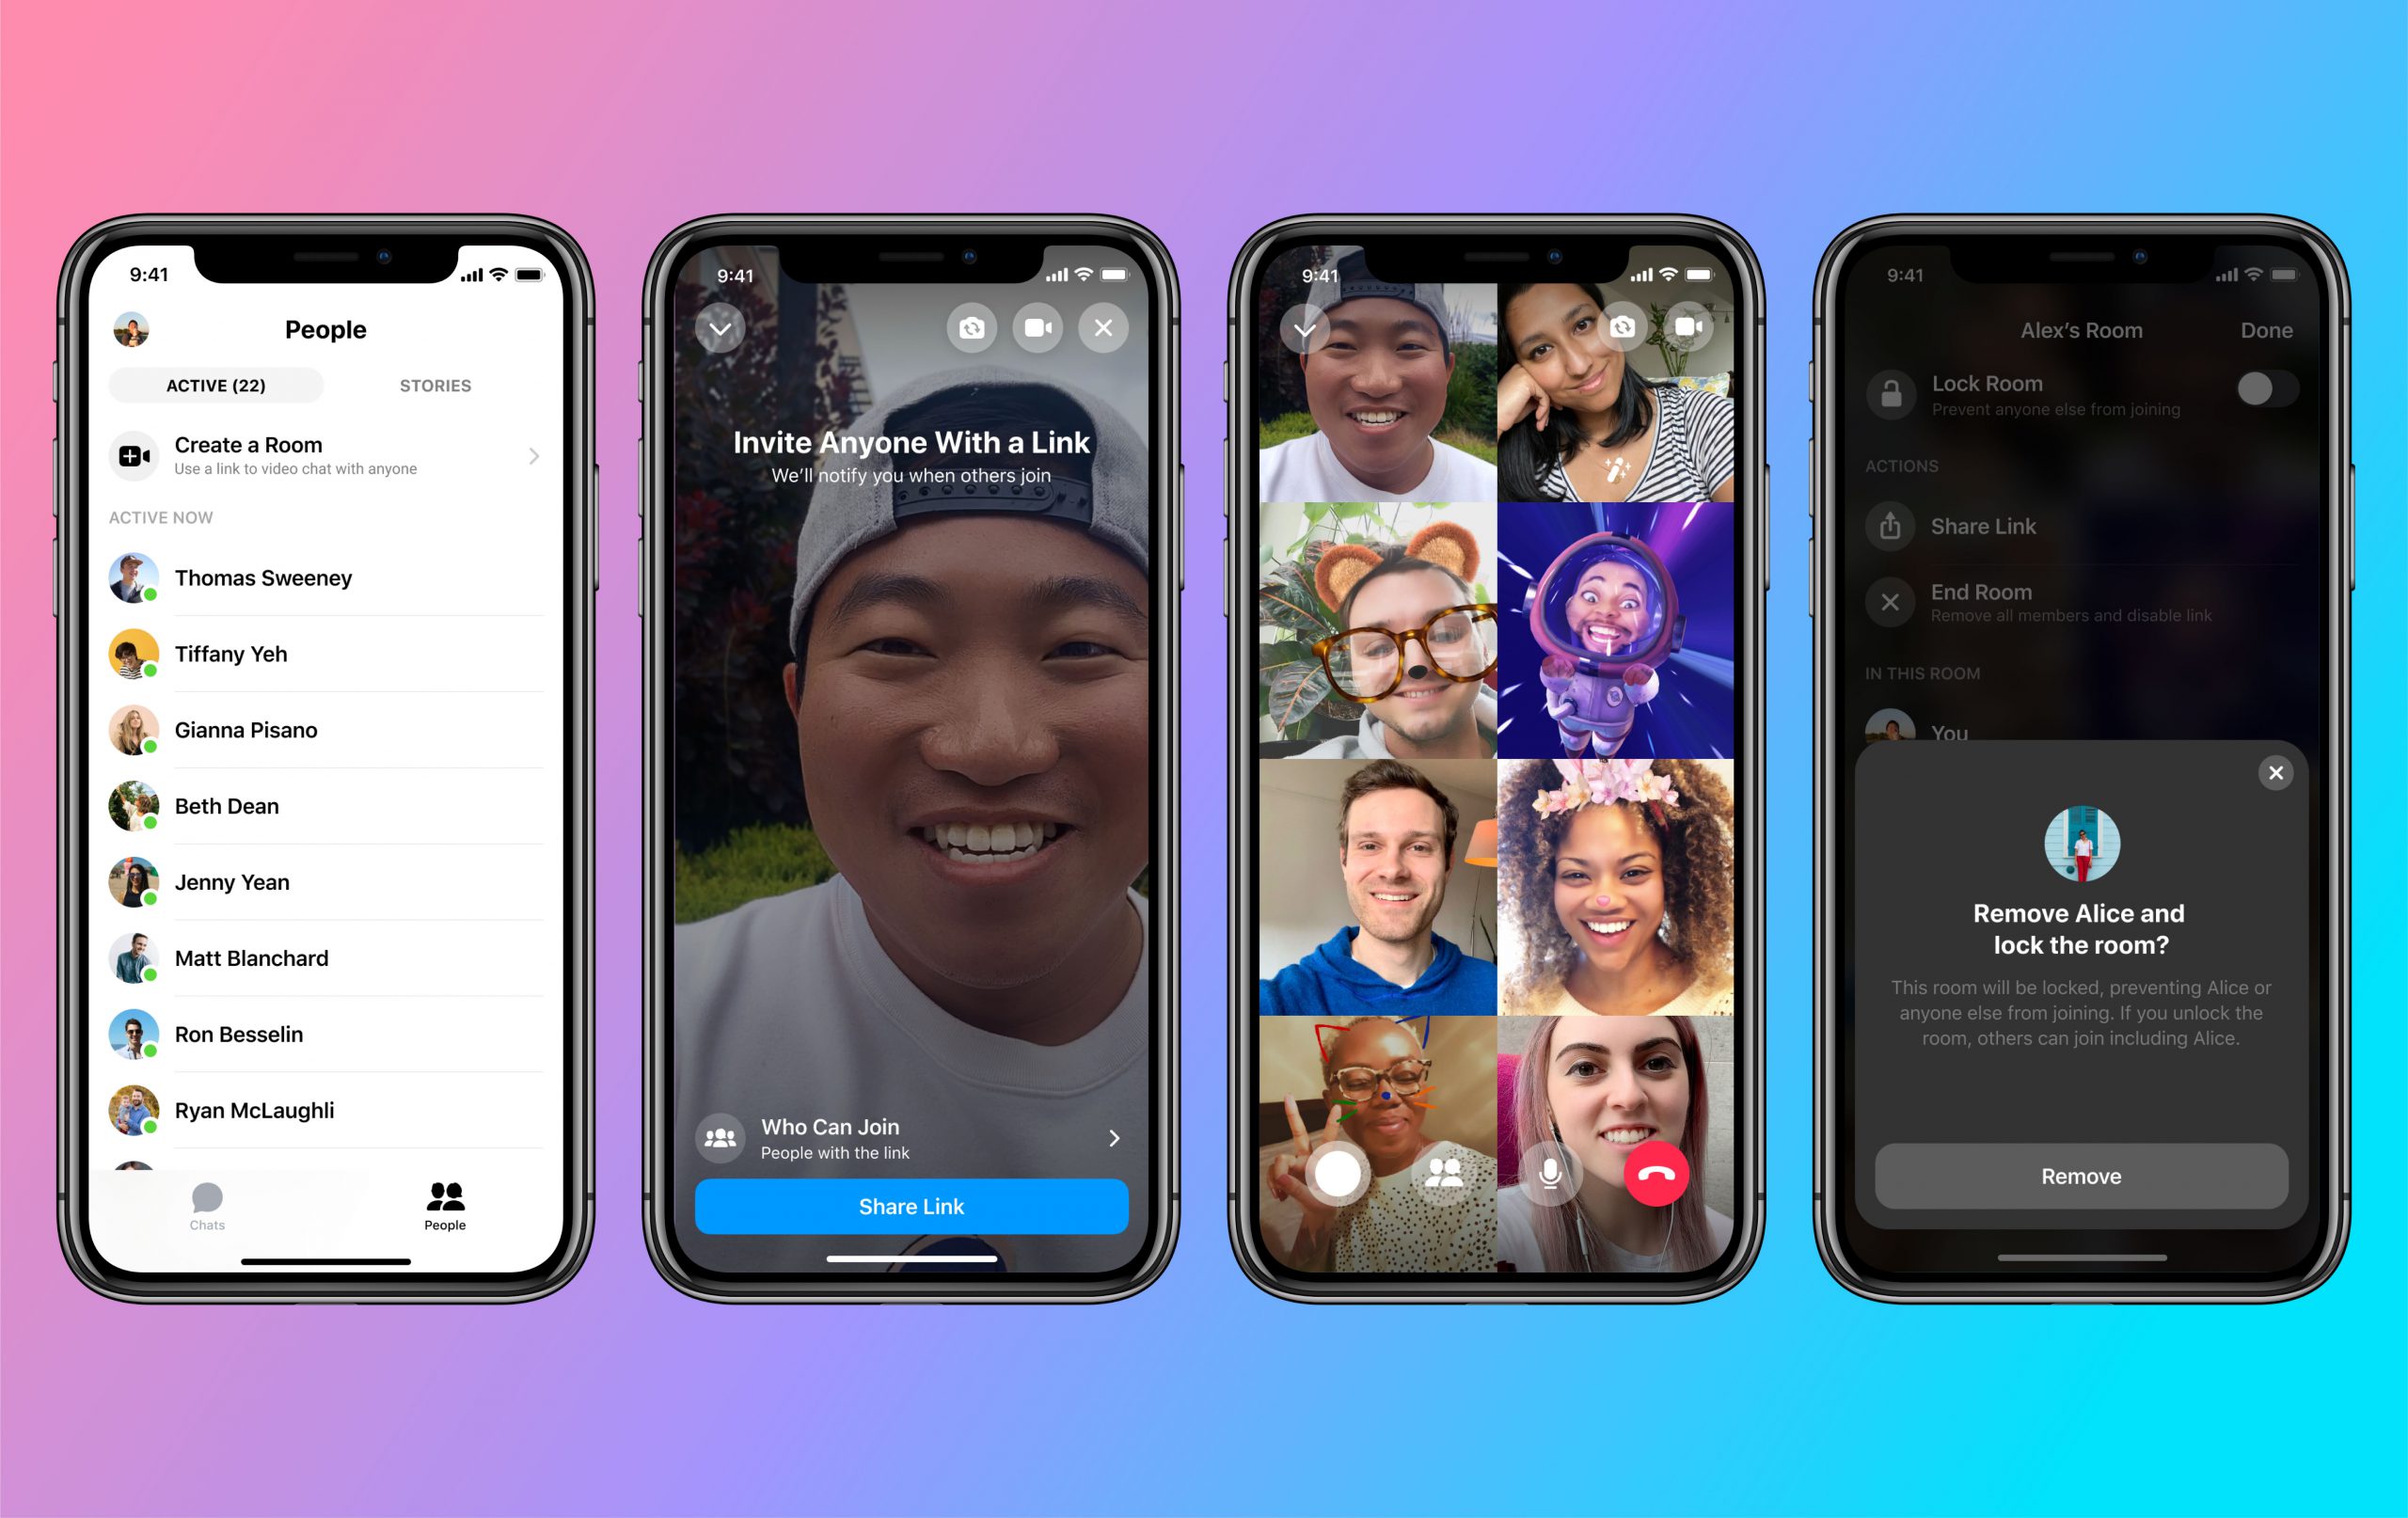 facebook launches drop in video chat rooms to rival houseparty scaled 1